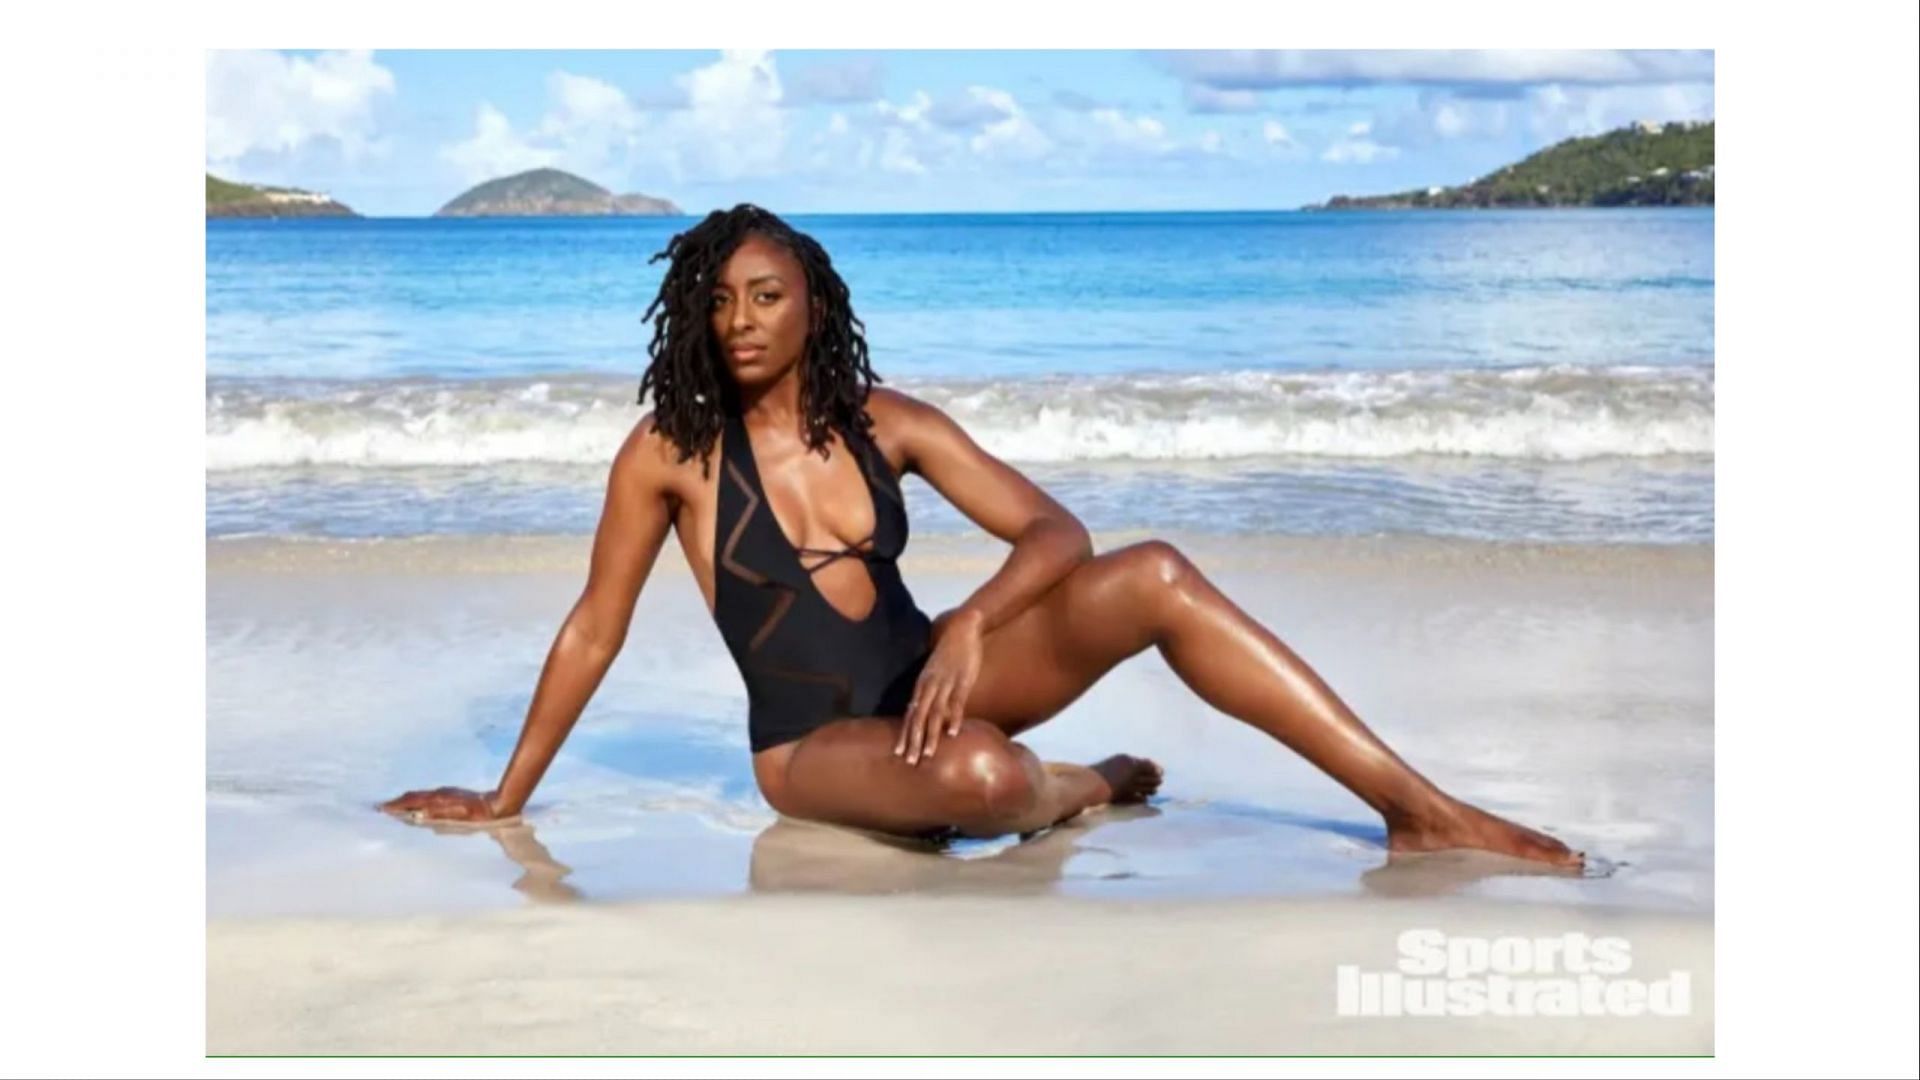 WNBA Stars Pose for Sports Illustrated Swimsuit Edition